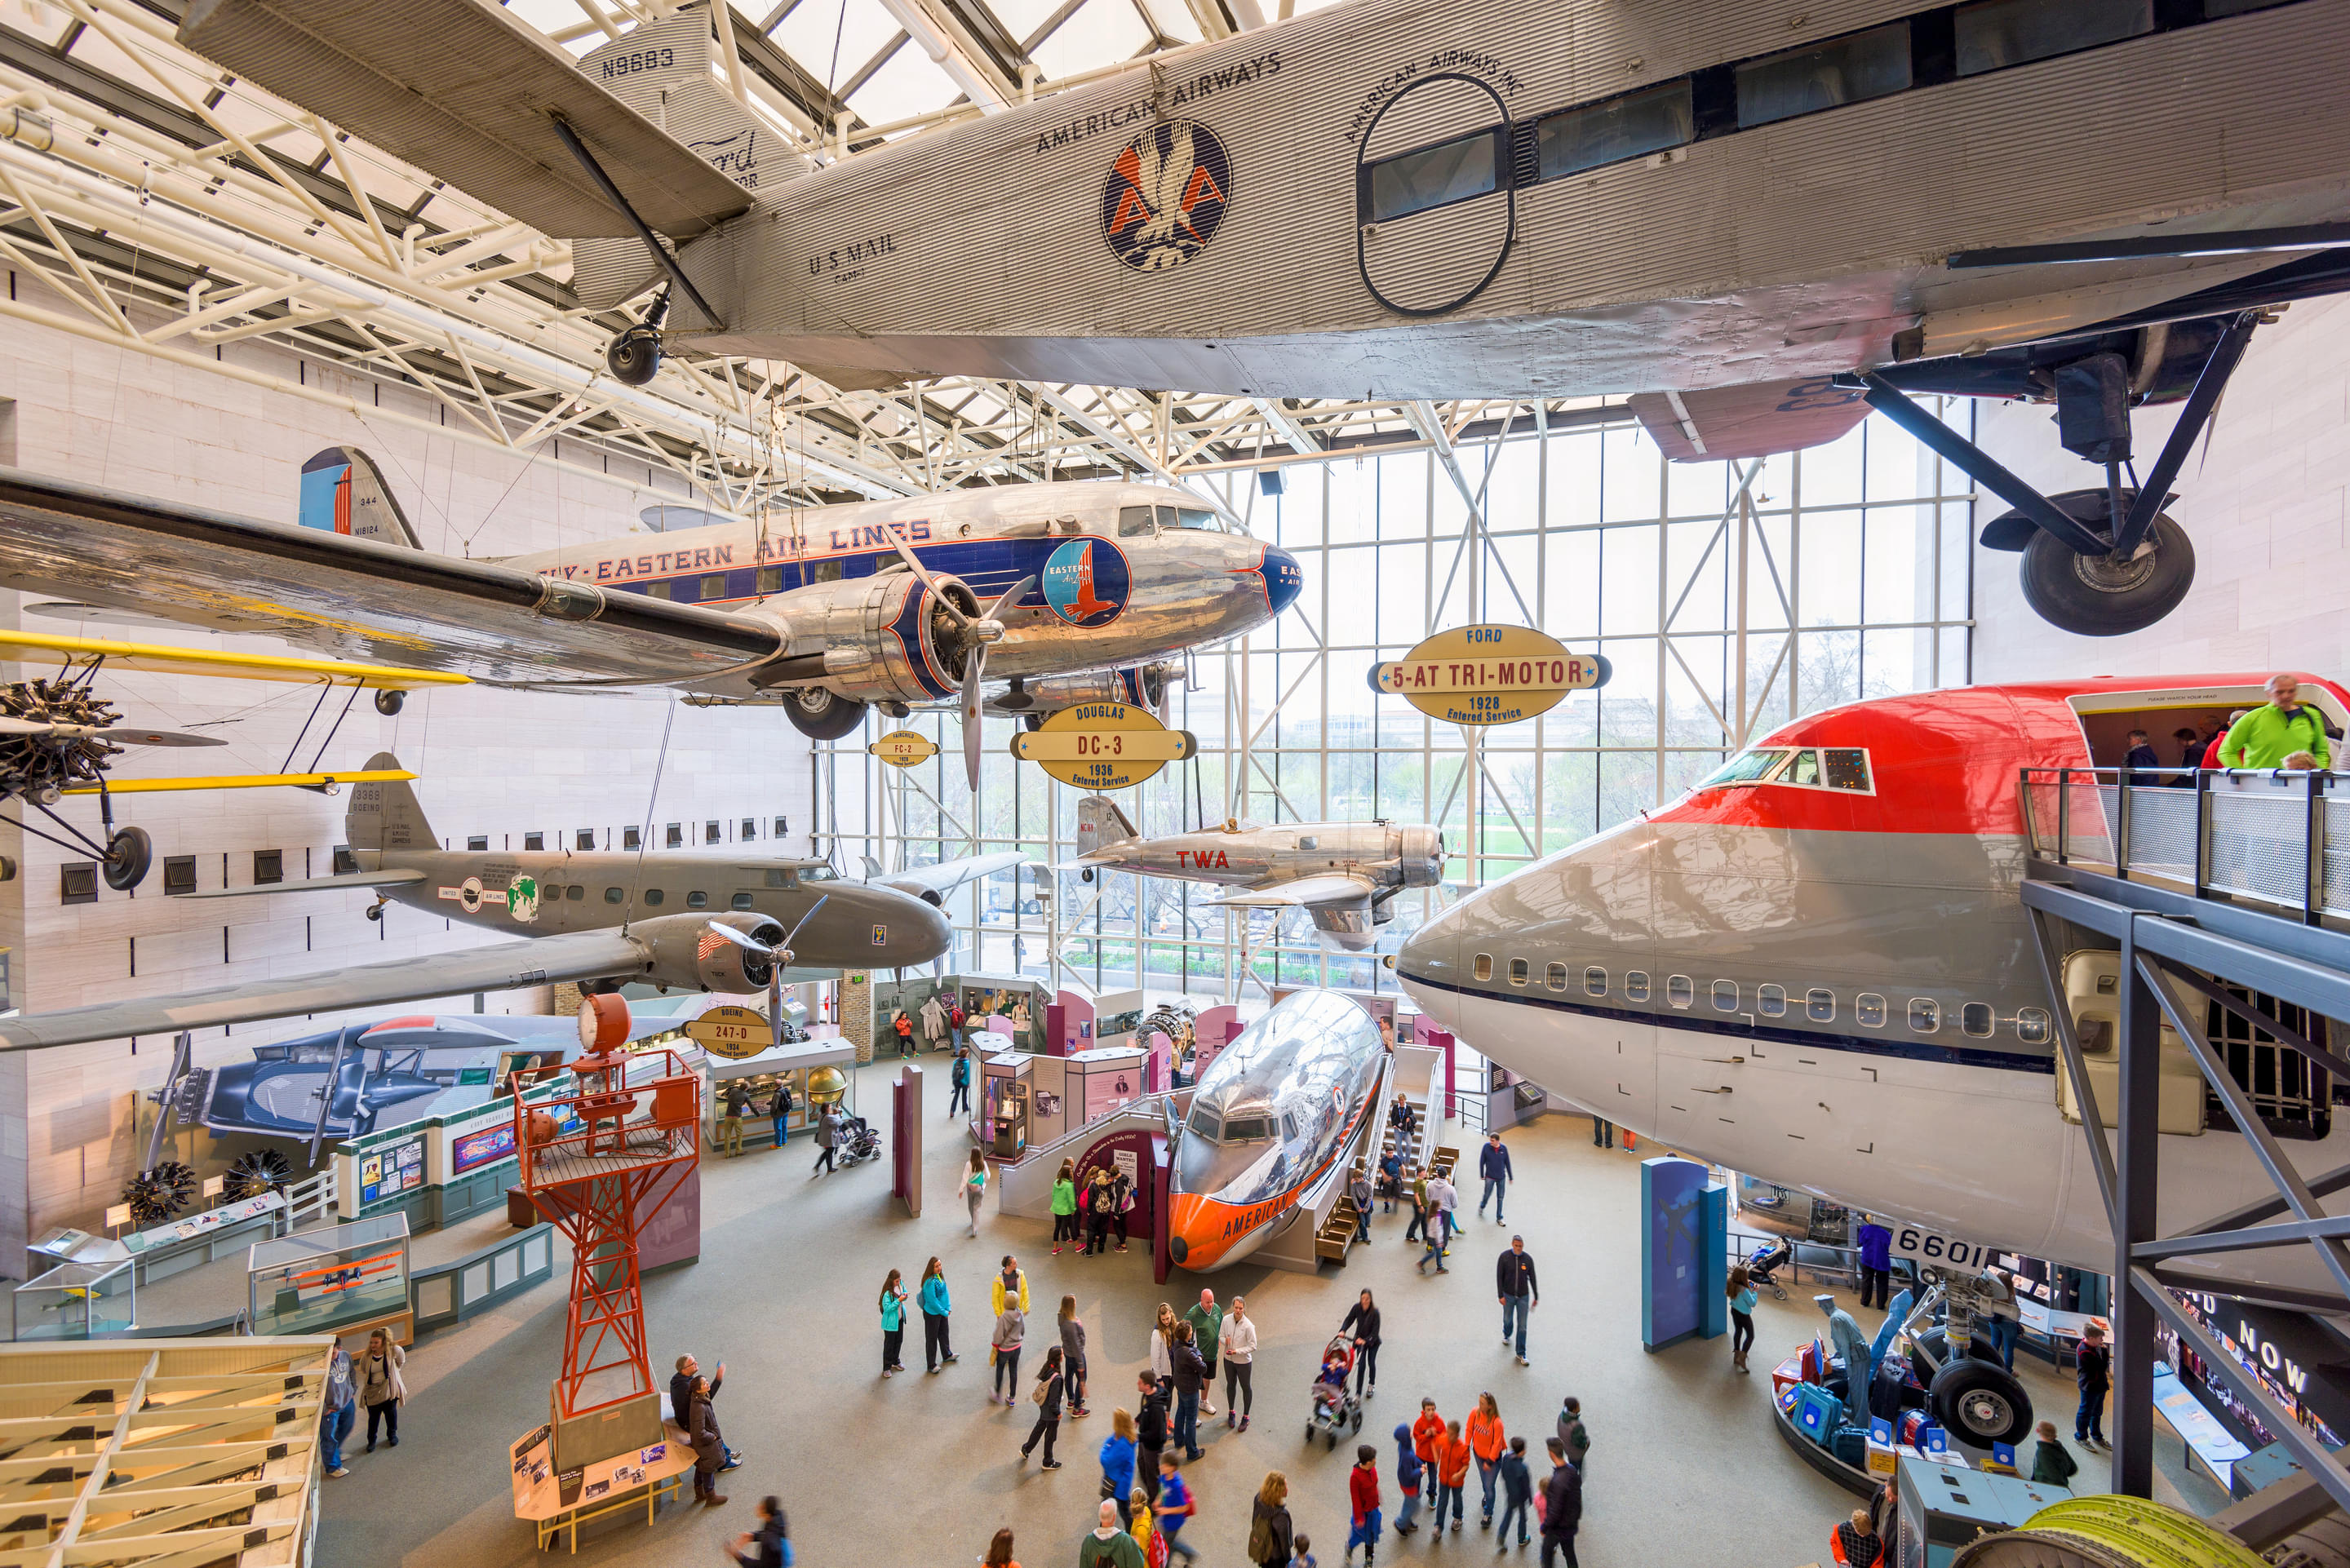 National Air And Space Museum Overview